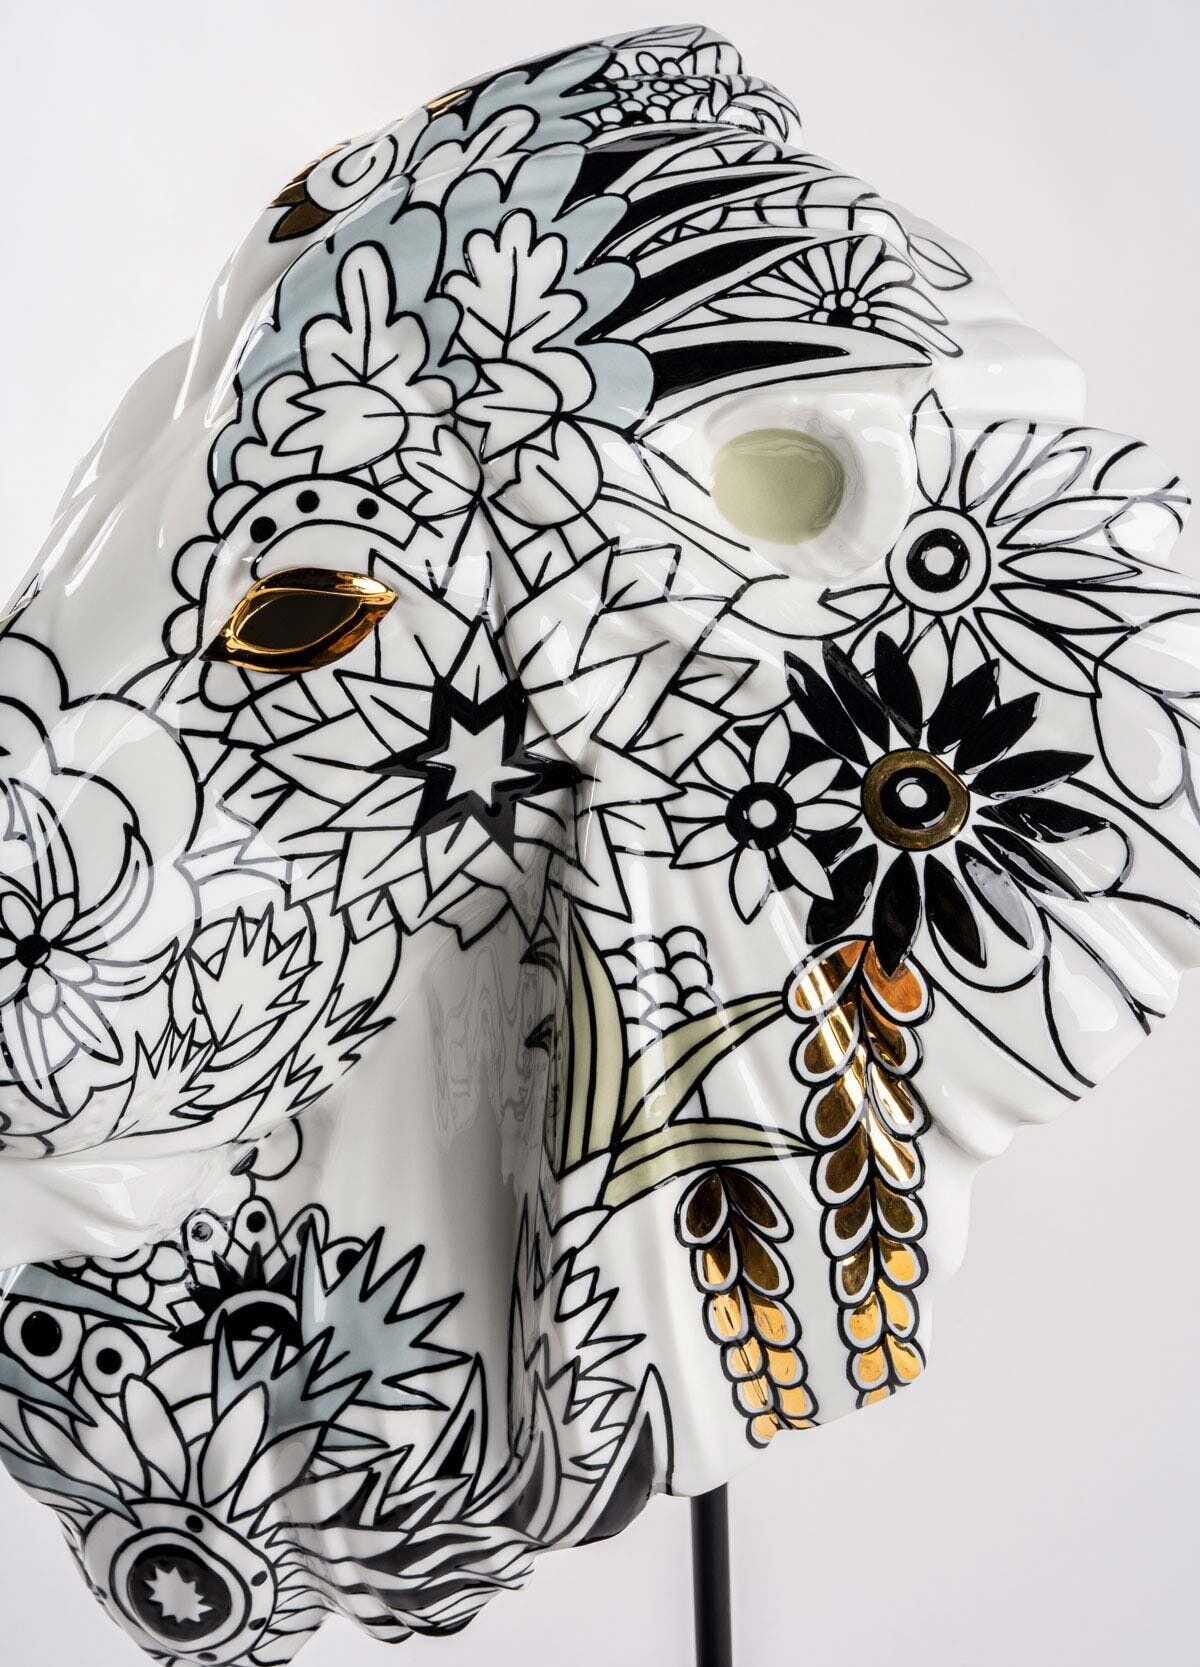 Lion Mask / Wild Nature Limited Edition